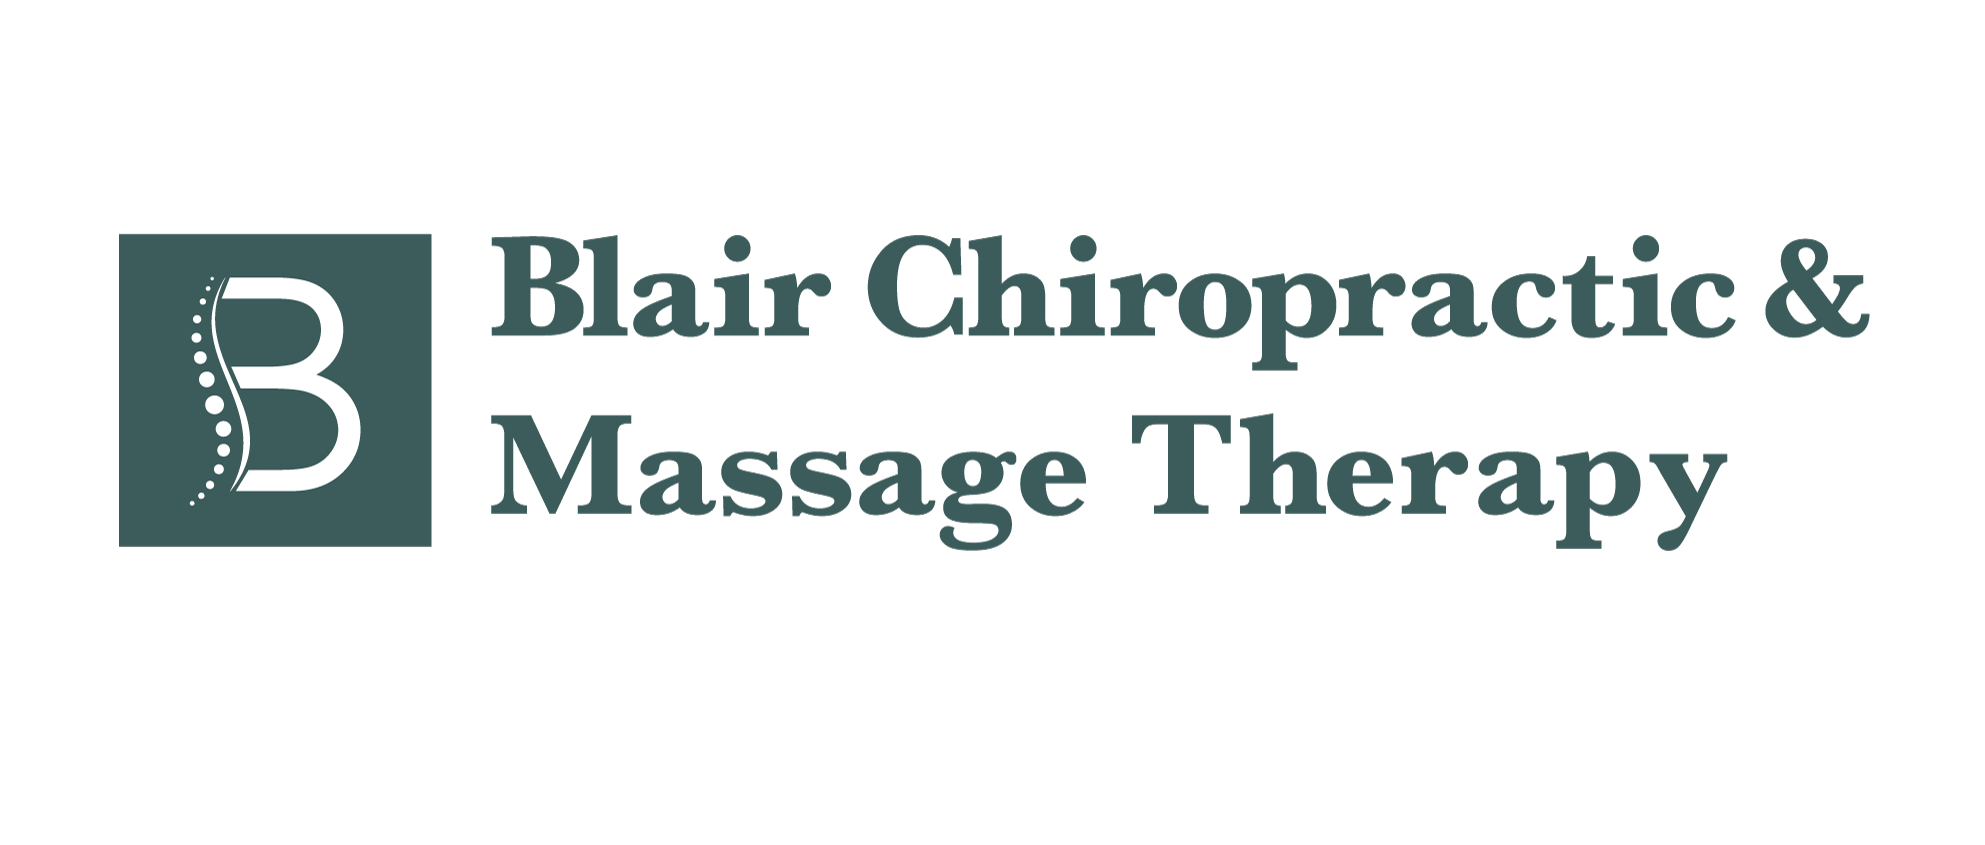 BLAIR CHIROPRACTIC  MASSAGE THERAPY